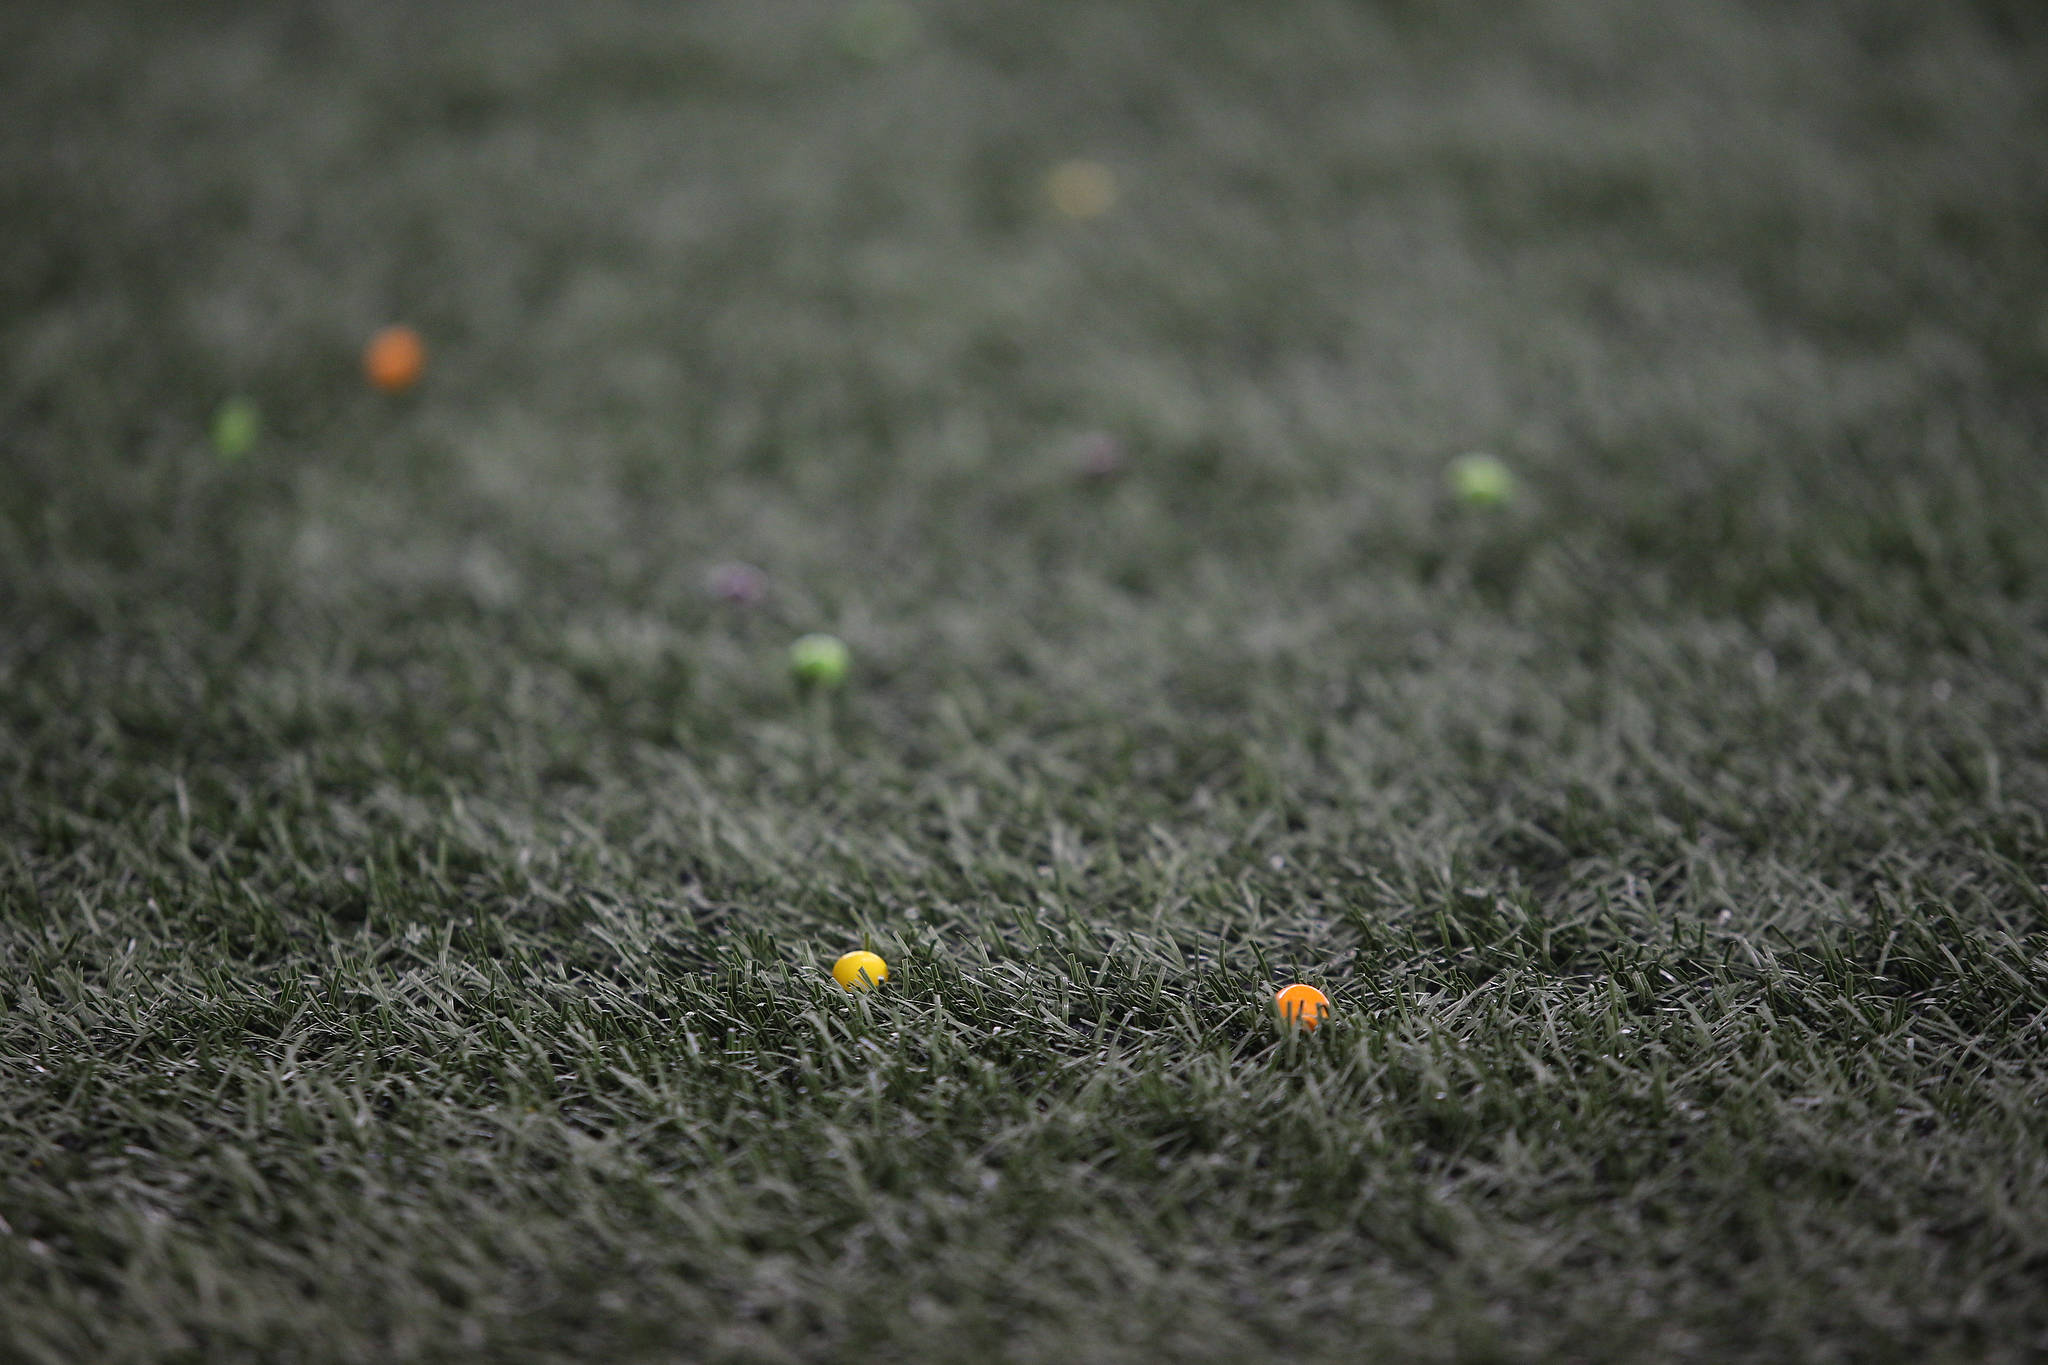 Fans throw Skittles onto the field to celebrate a touchdown by Seattle Seahawks’ Marshawn Lynch as the Seahawks lost to the San Francisco 49ers 26-21 at CenturyLink Field on Sunday, Dec. 29, 2019 in Seattle, Wash. (Andy Bronson / The Herald)